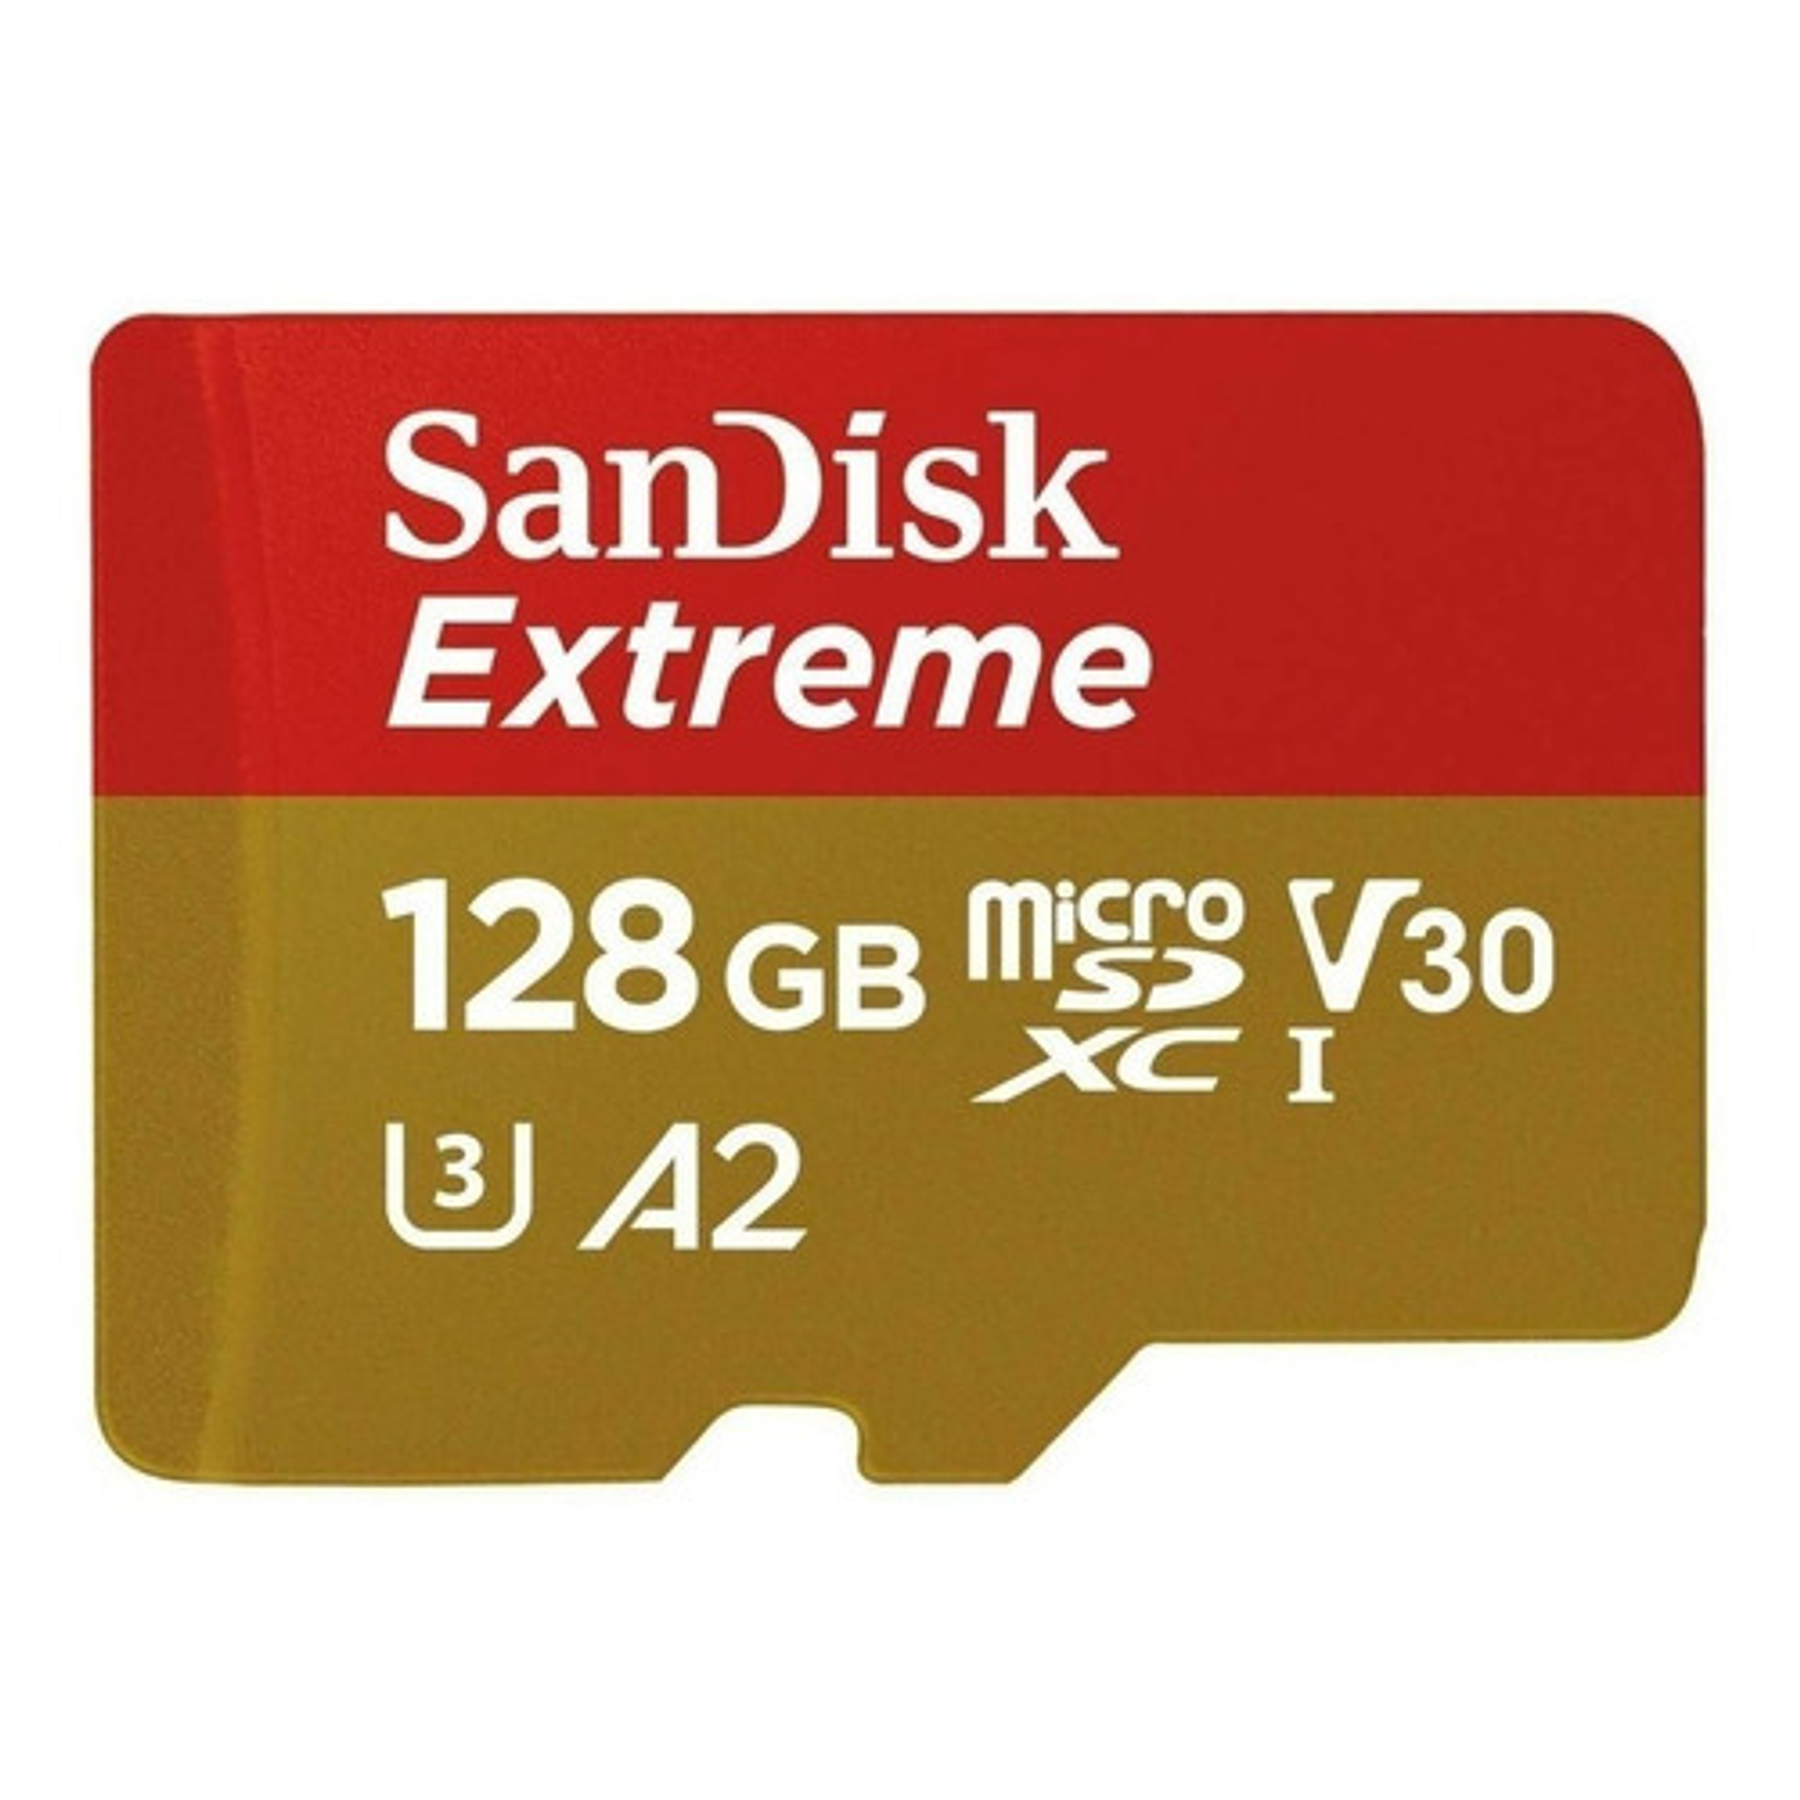 Sandisk Extreme Micro SD 128gb Cass10 160Mb/60Mb